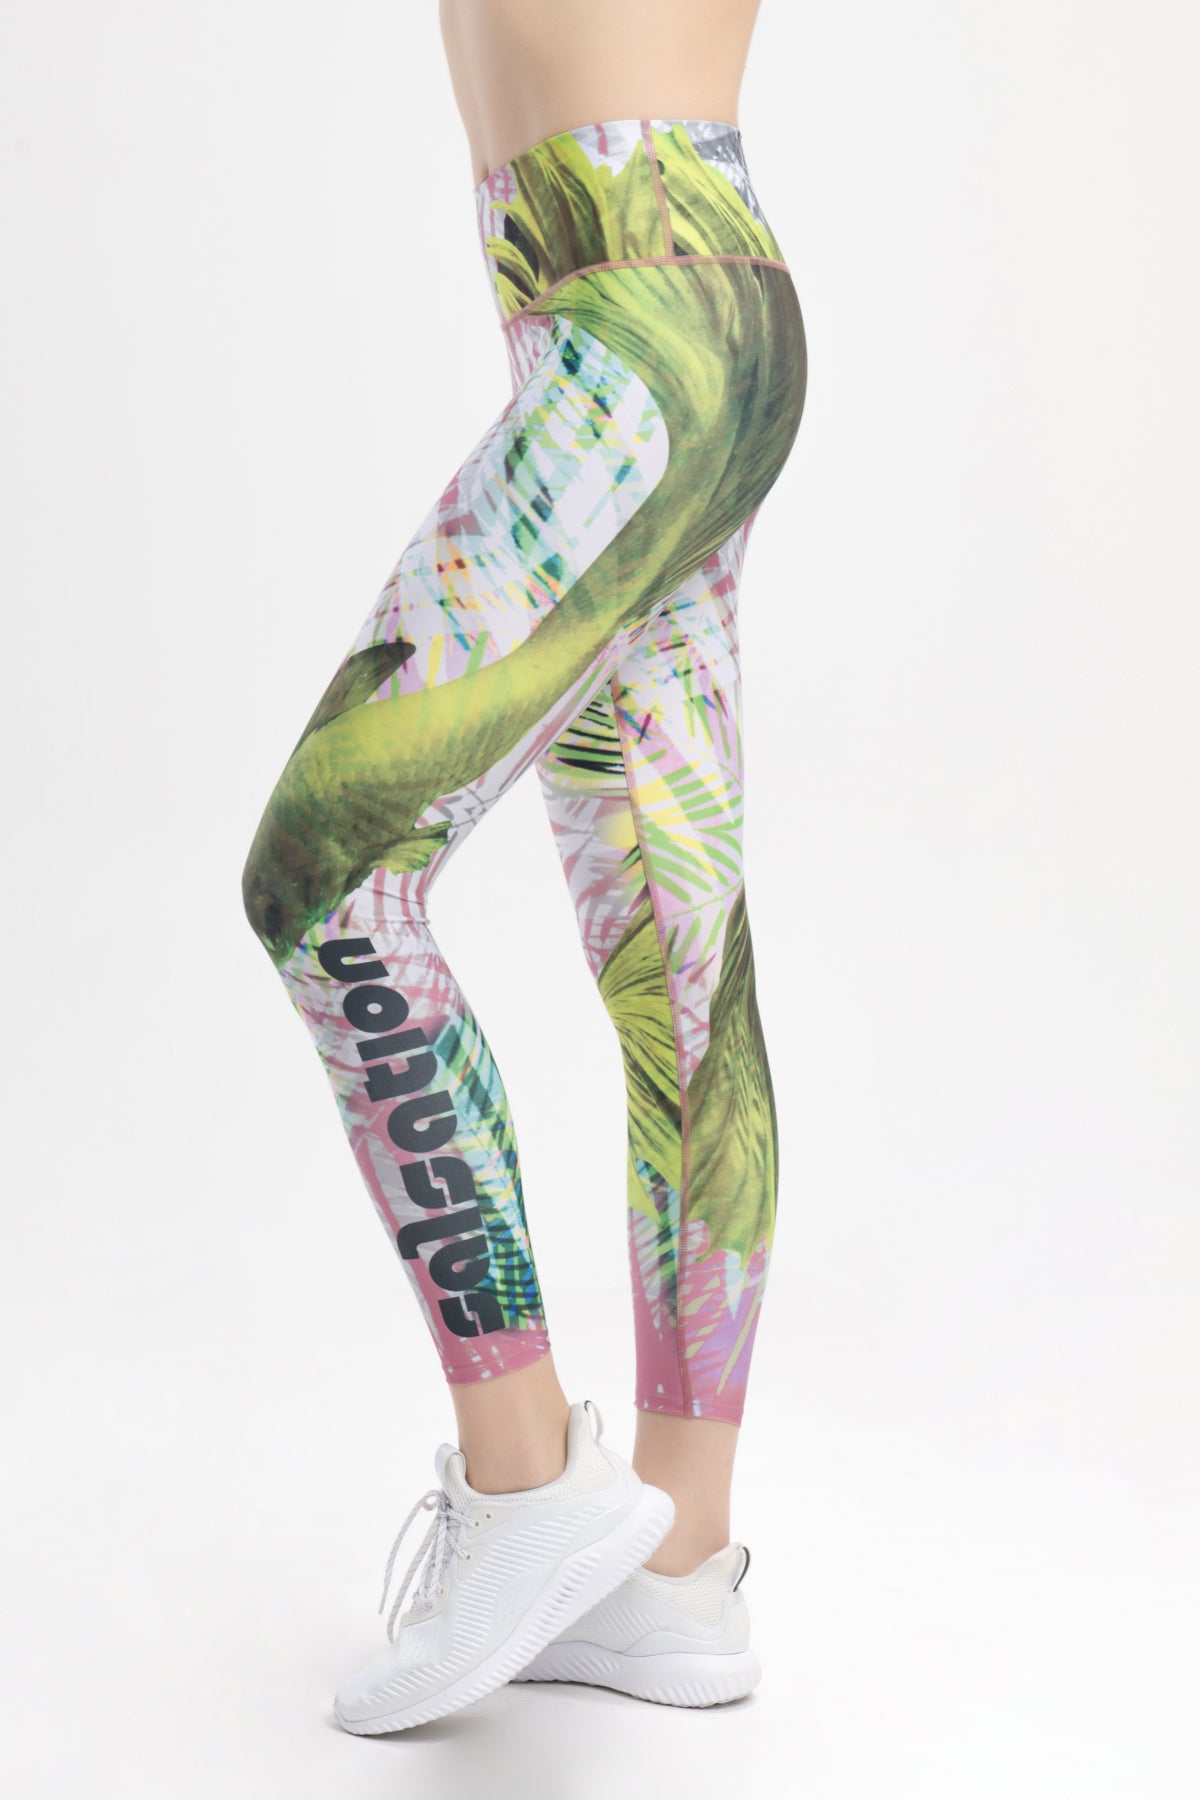 Into the Water Leggings